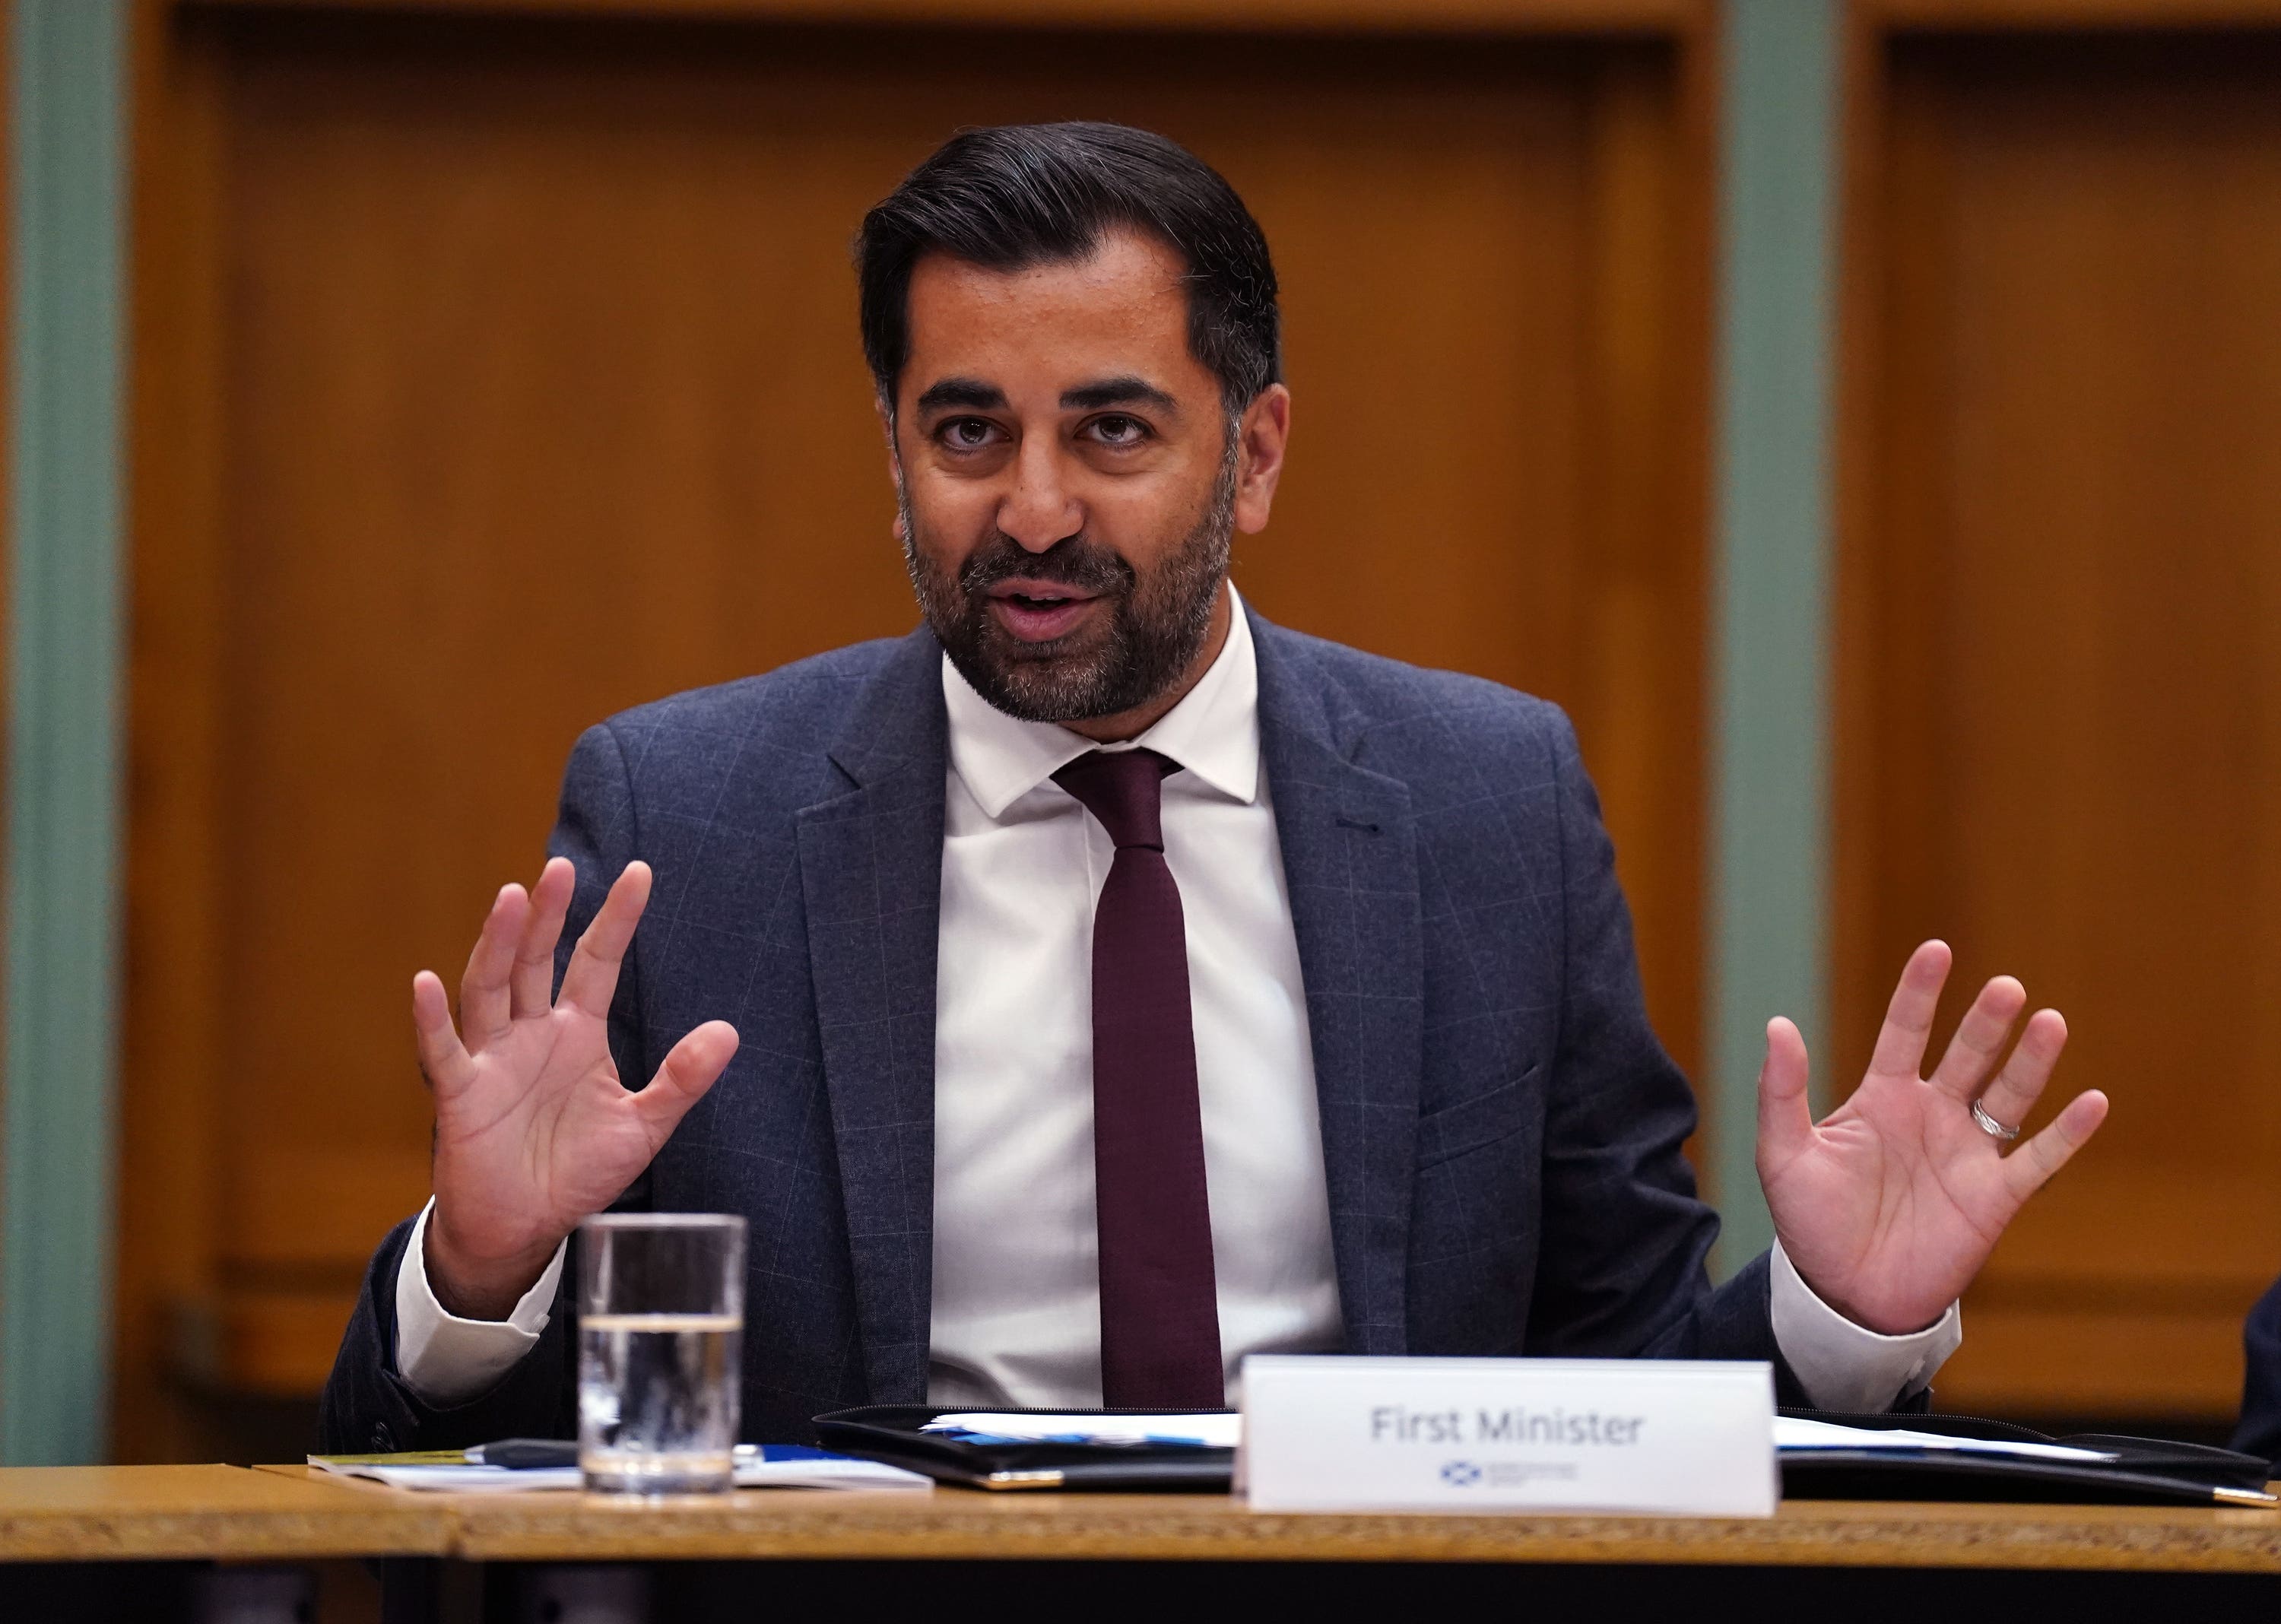 Humza Yousaf has urged Unison to avoid strikes and put COSLA's offer to their members.